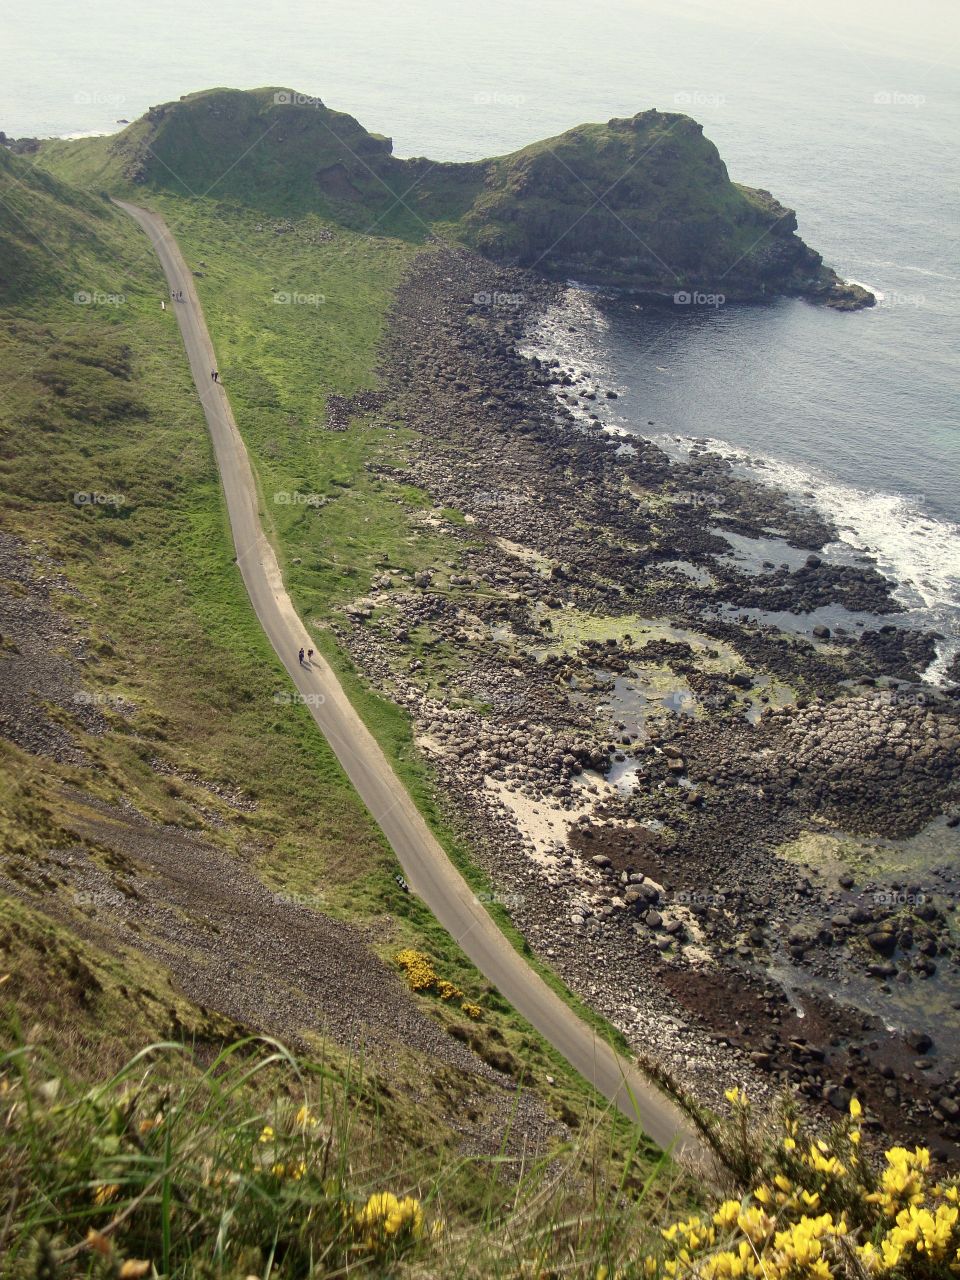 Giants Causeway road from top angle, Northern Ireland, UK